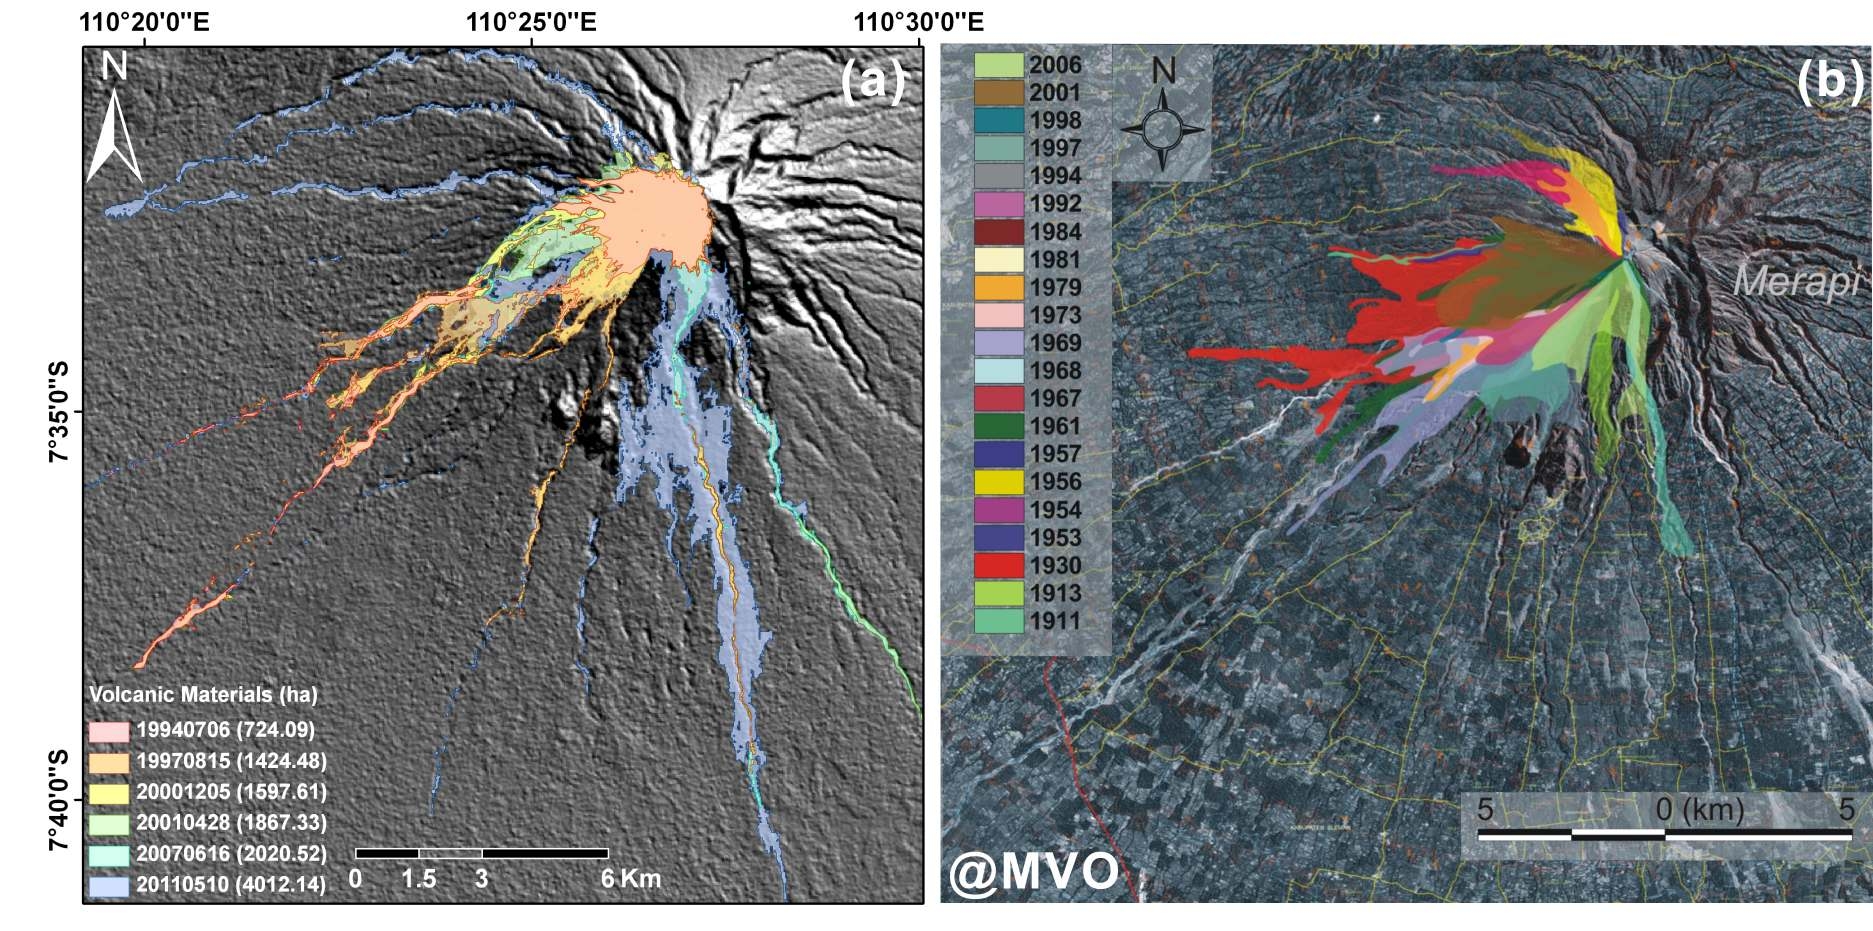 Fig. 3.2.13 (a) Overlap of volcano materials layers extracted by supervised classification. (b) Distribution of pyroclastic flow at Merapi volcano after 1900